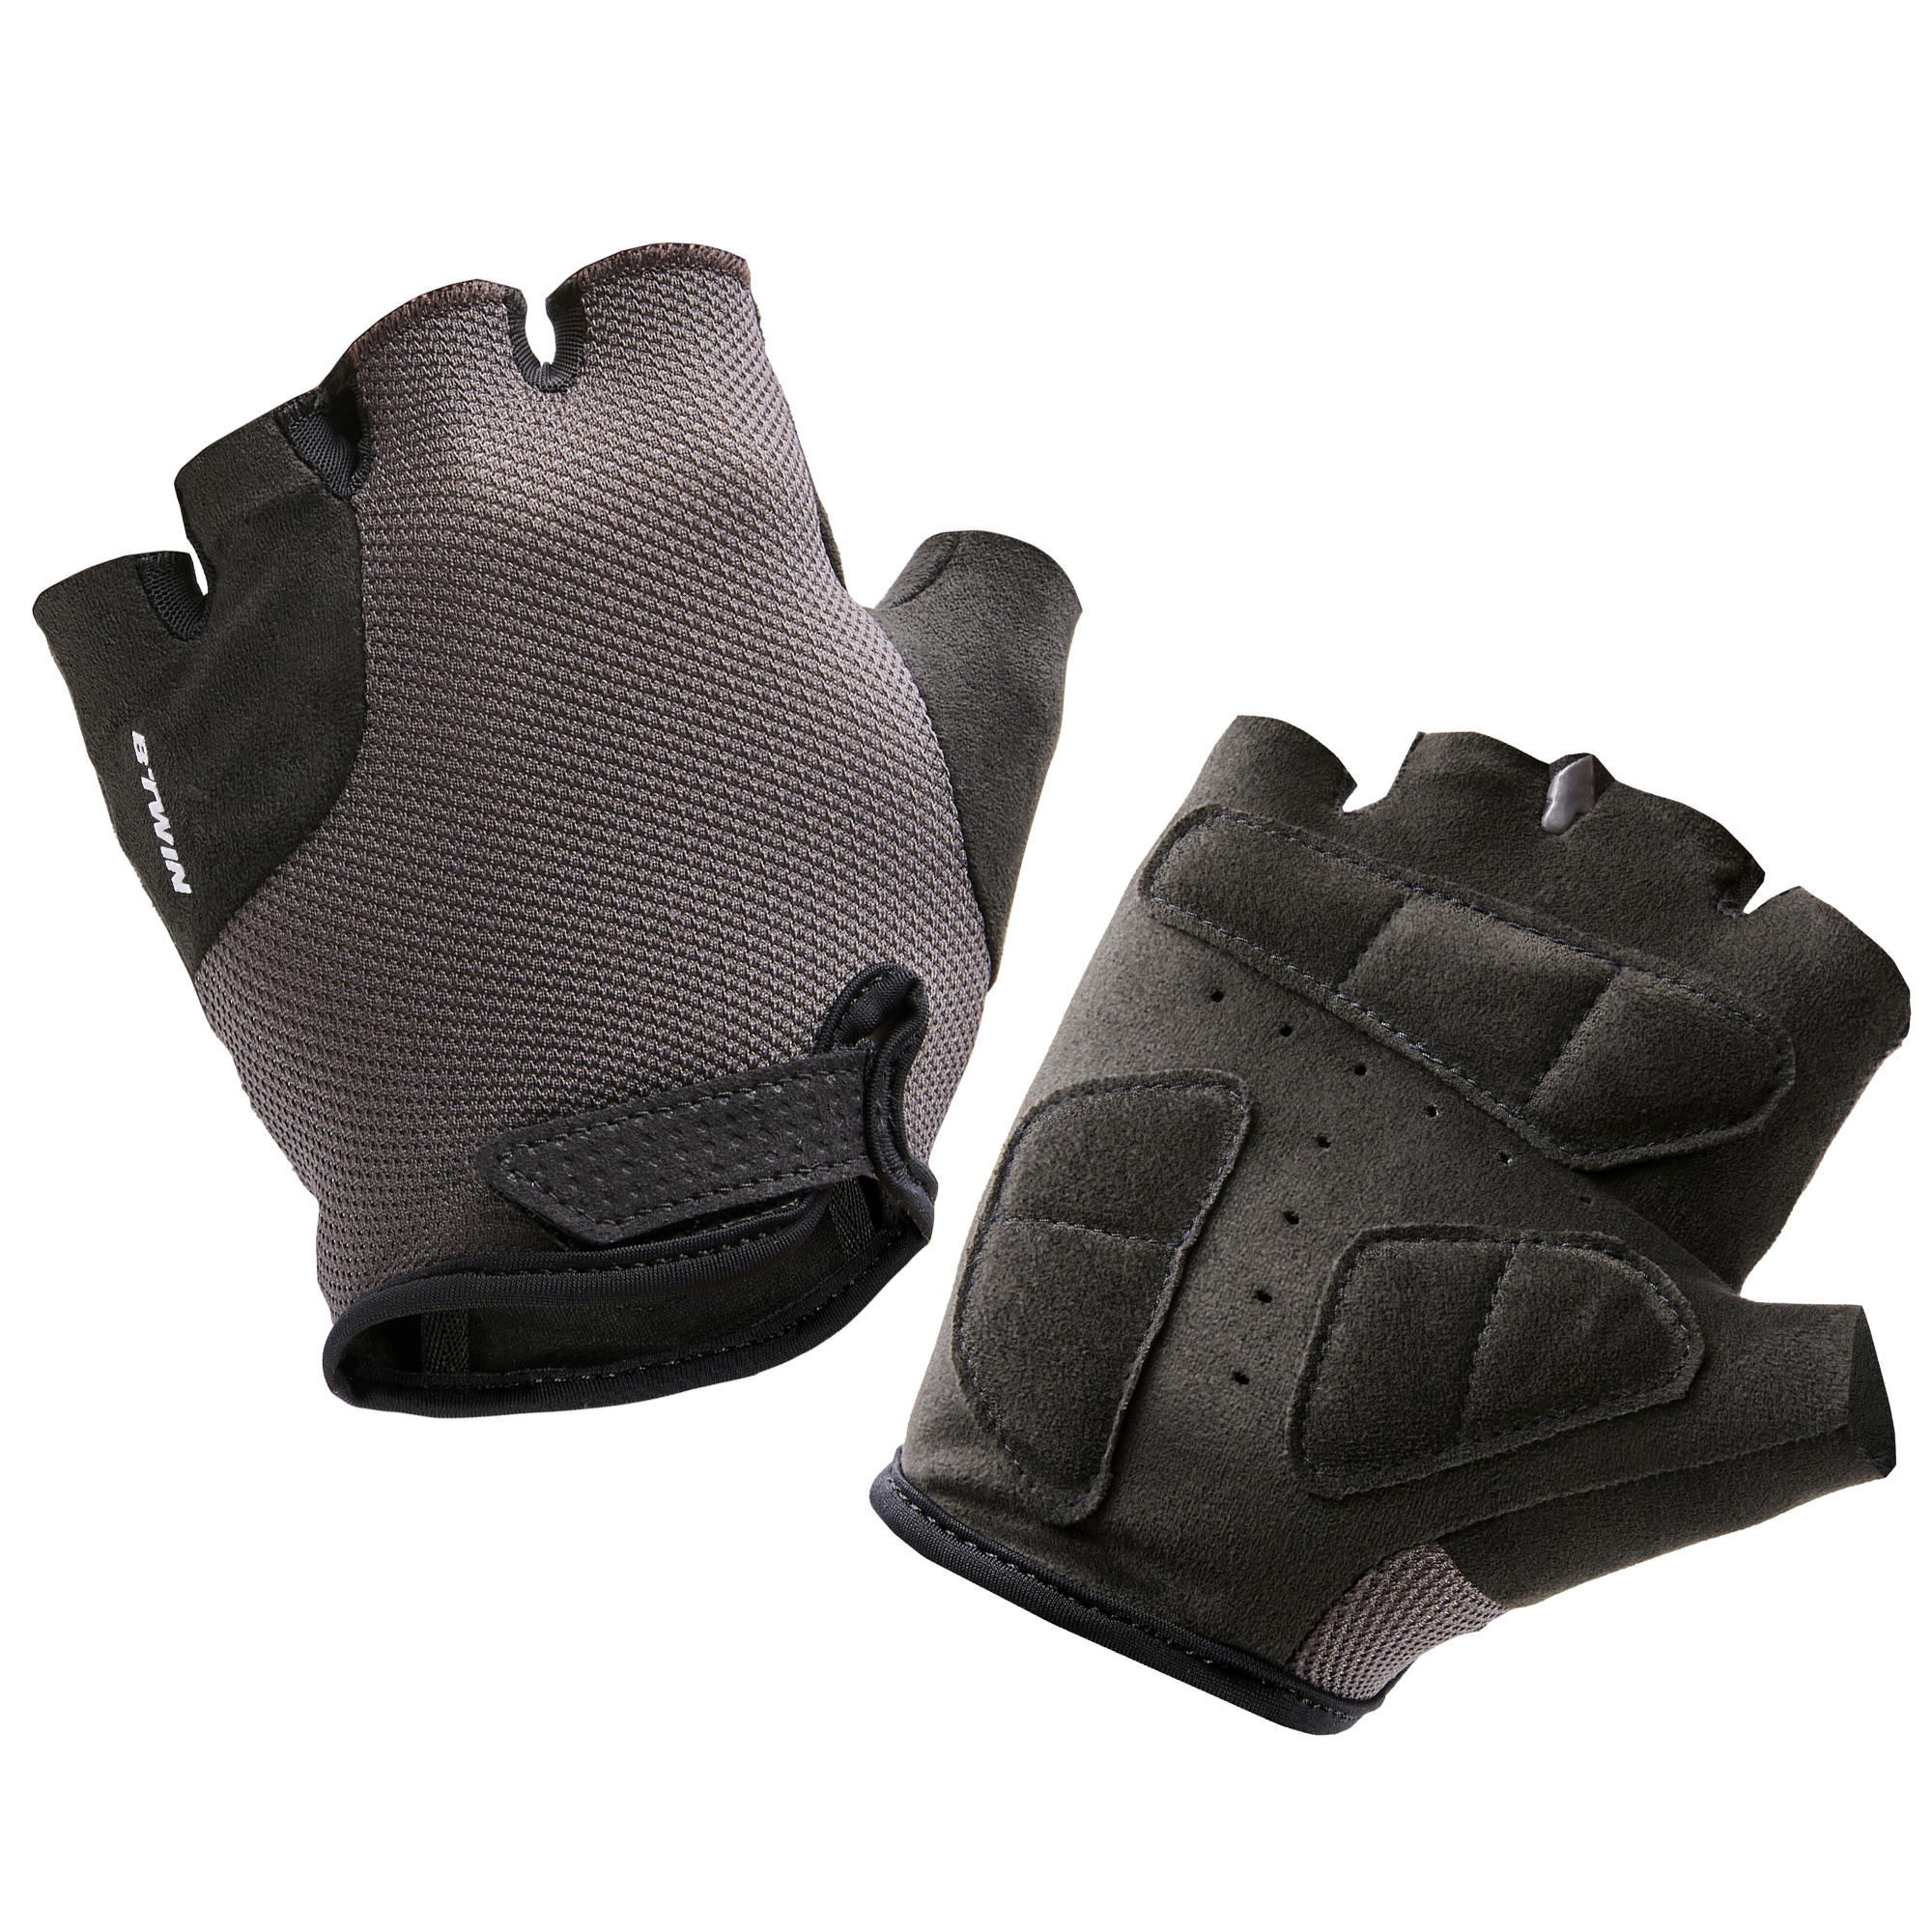 BTWIN Kids' Cycling Gloves 500 - Grey